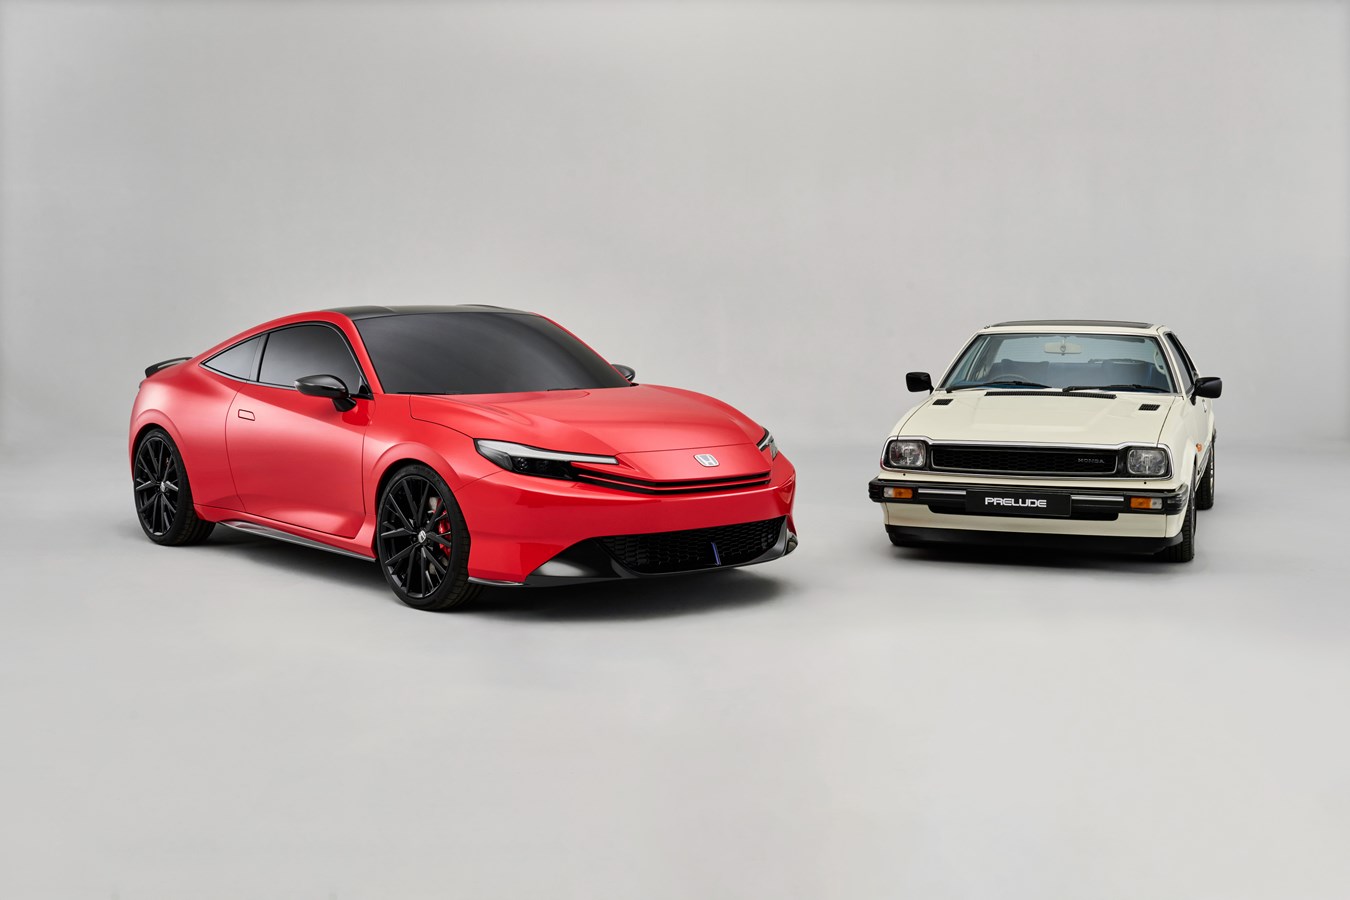 The Five Generations the New Honda Prelude Must Live up To